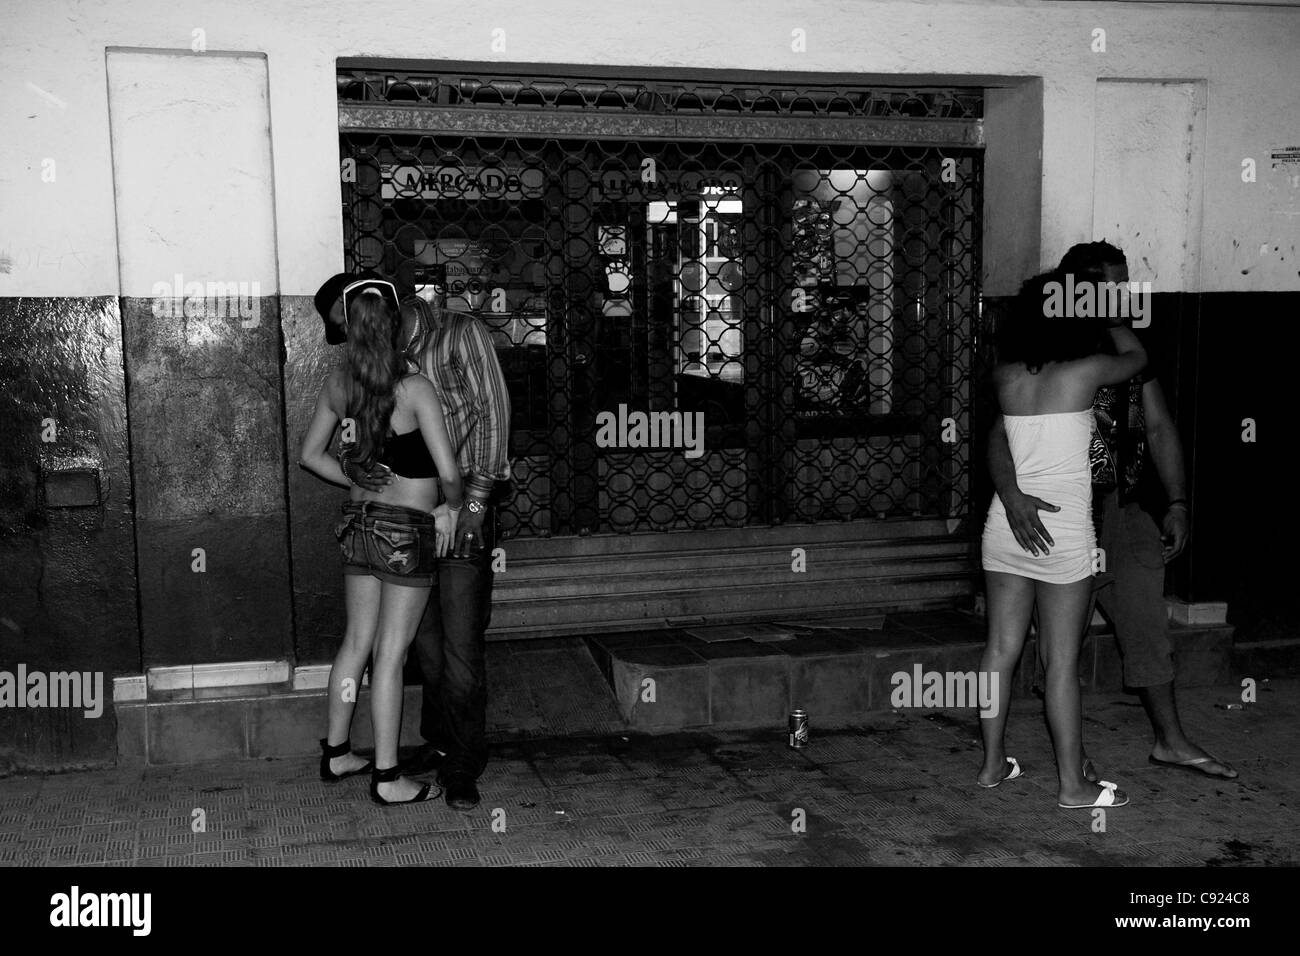 Two couples making out in the streets of Havana, Cuba. Black & white image. Stock Photo